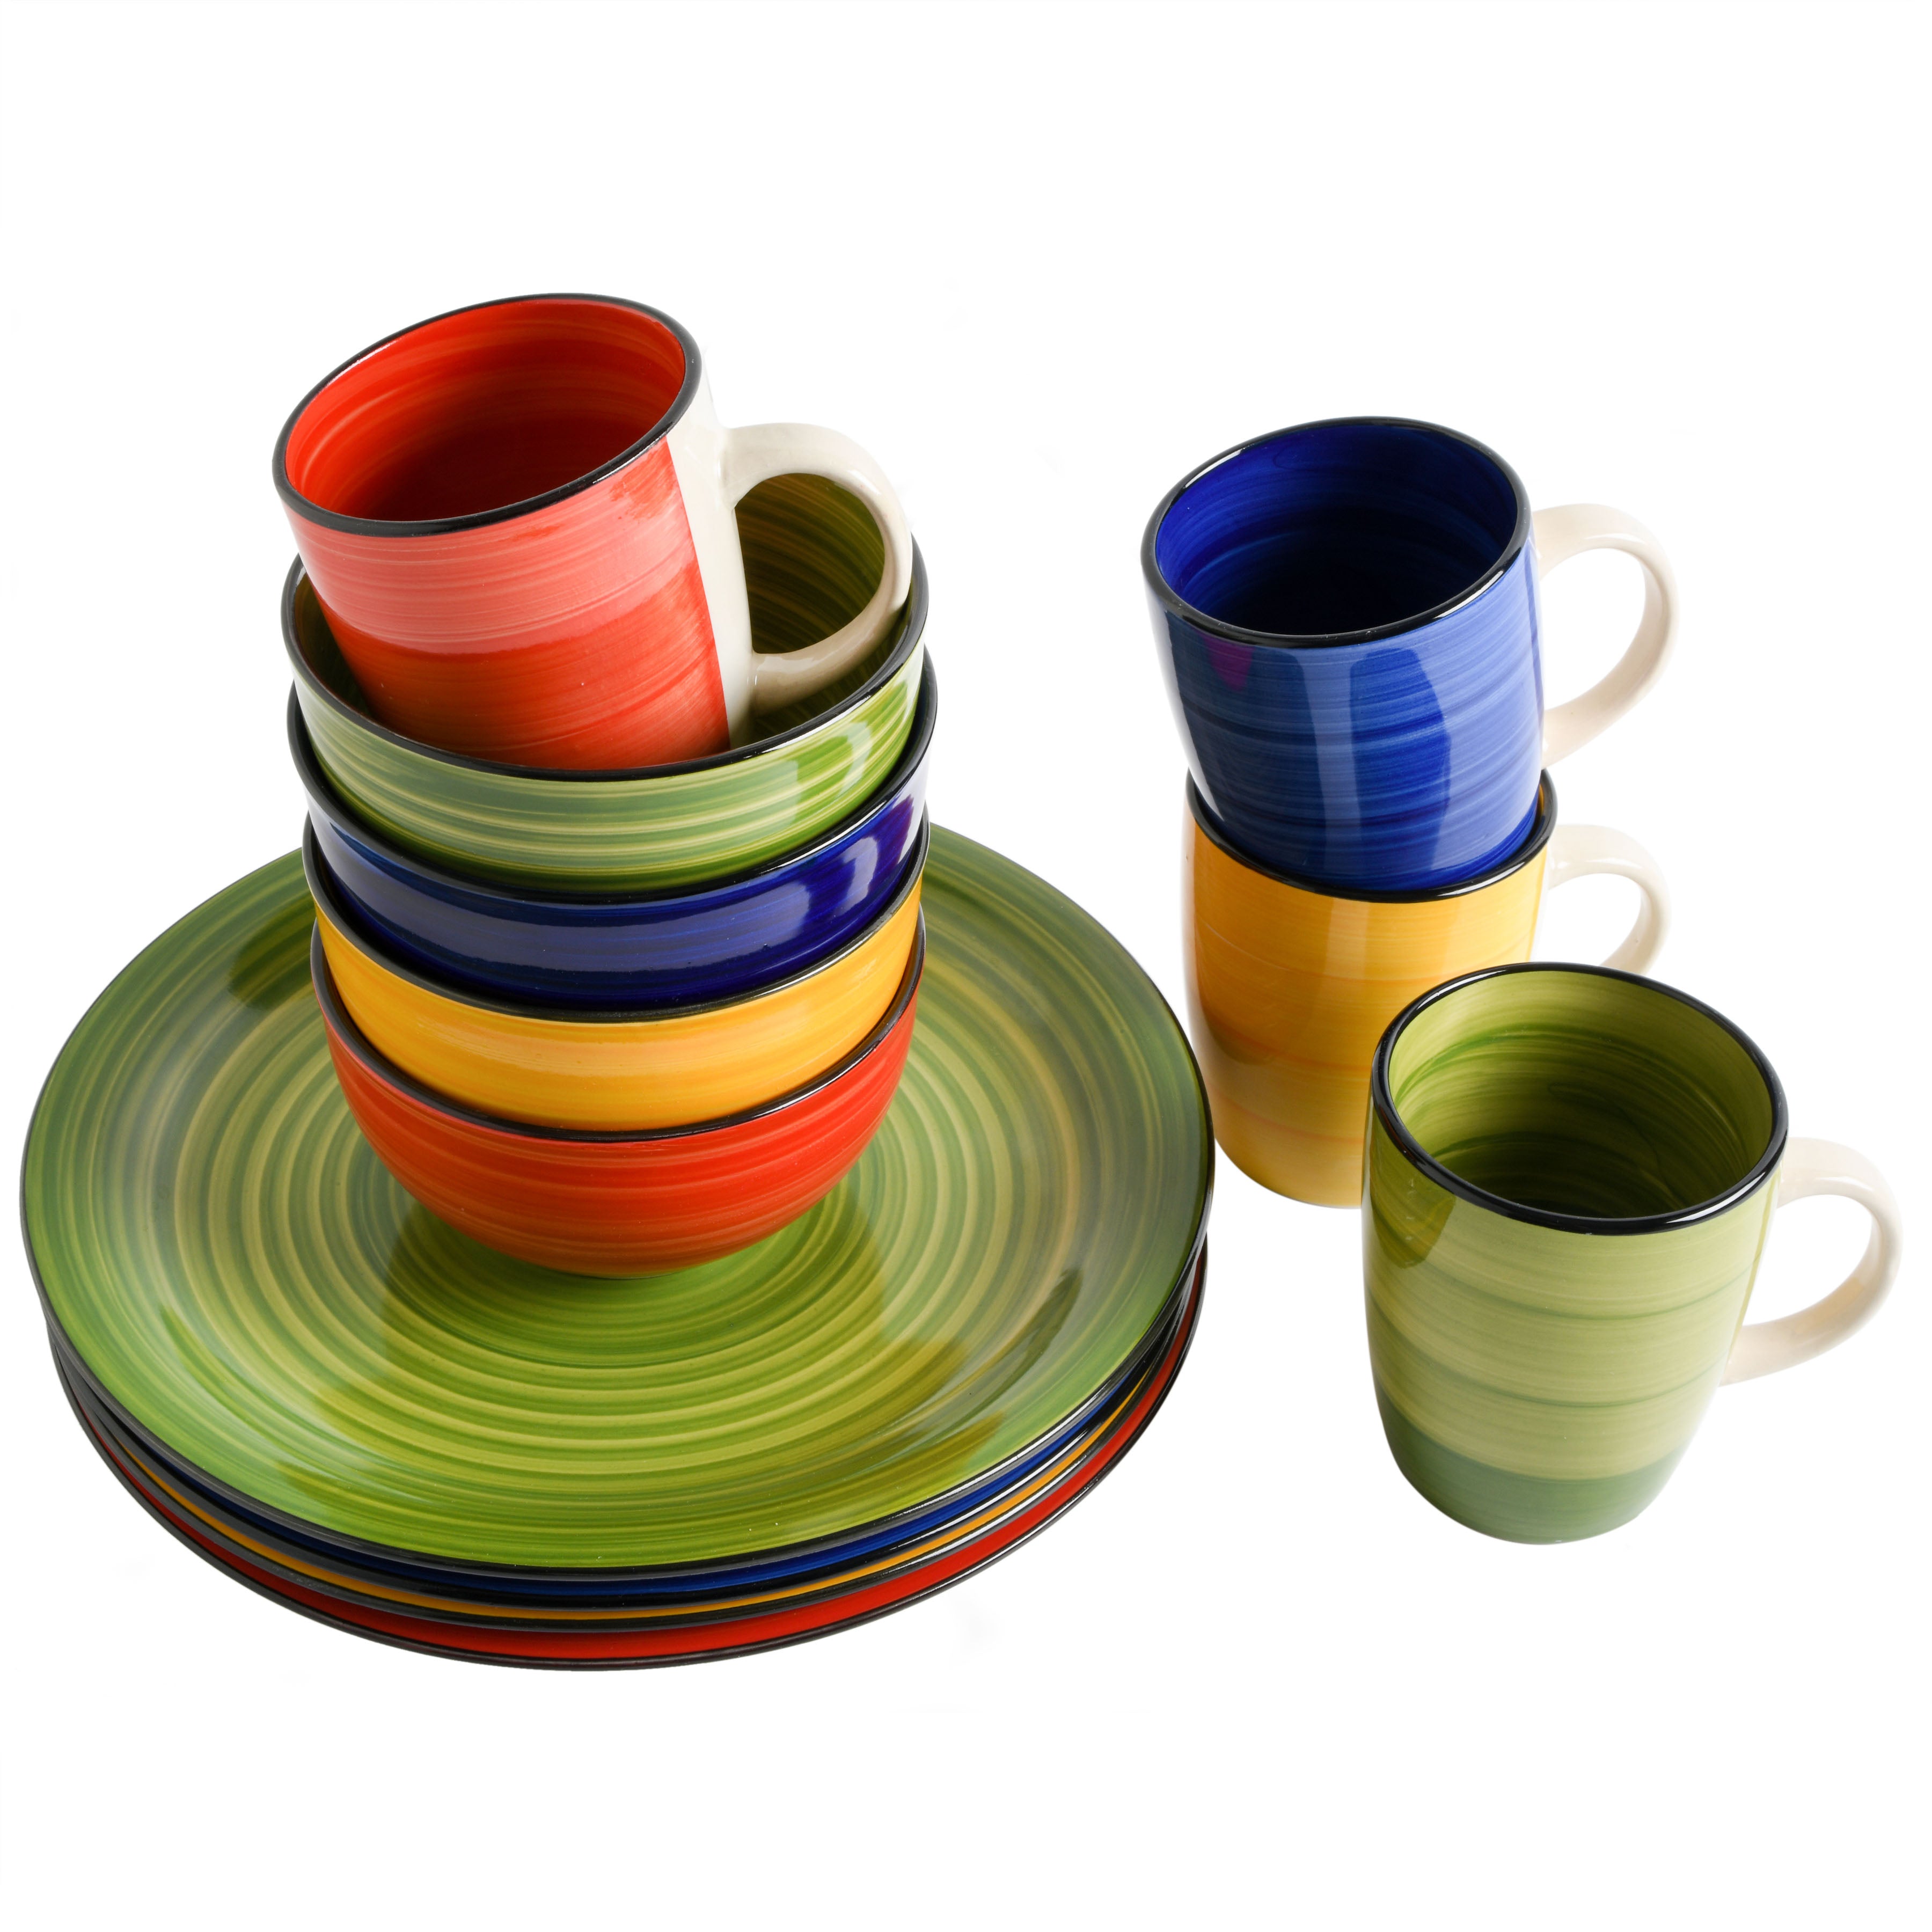 Gibson Home Color Vibes 12-Piece Hand-Painted Stoneware Dinnerware Set